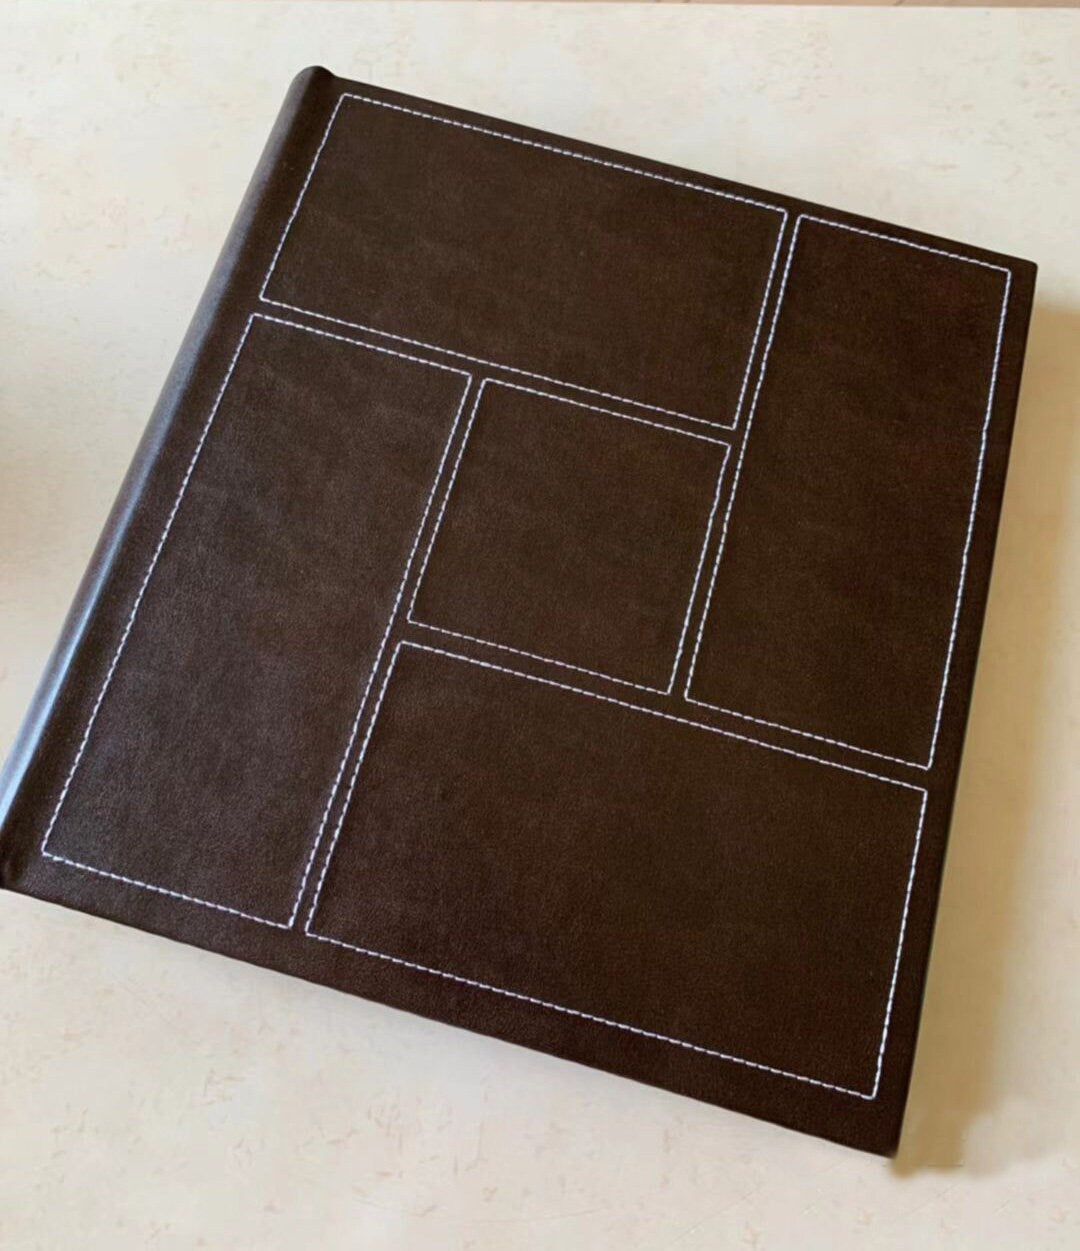 Pocket Leather Photo Album 5x7 for 200 photos. Slip-In Family Album with Sleeves. Baby Growth Album Wedding Anniversary Book Graduation Gift